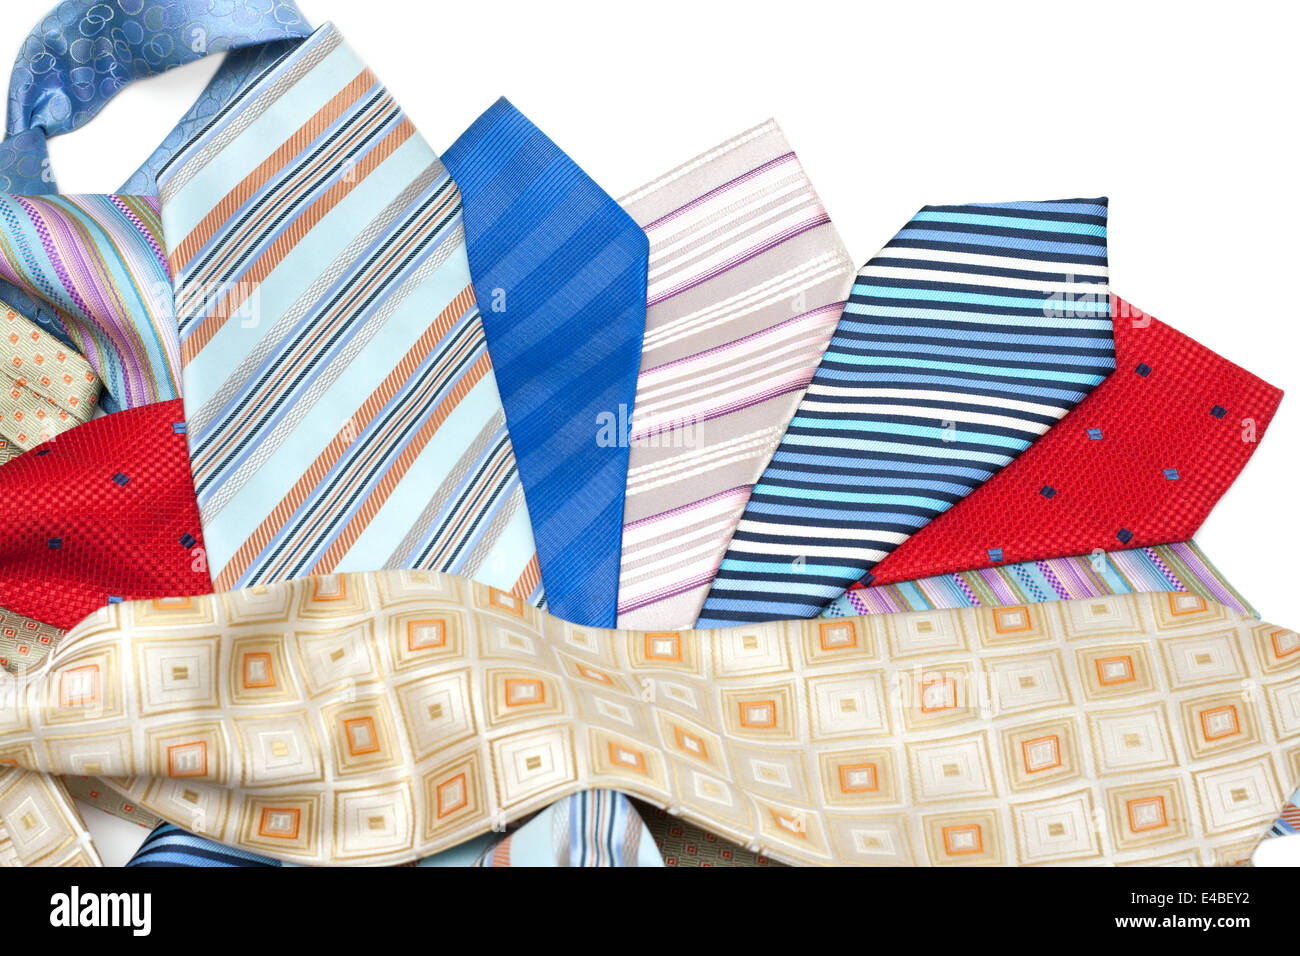 Male ties over white background Stock Photo - Alamy